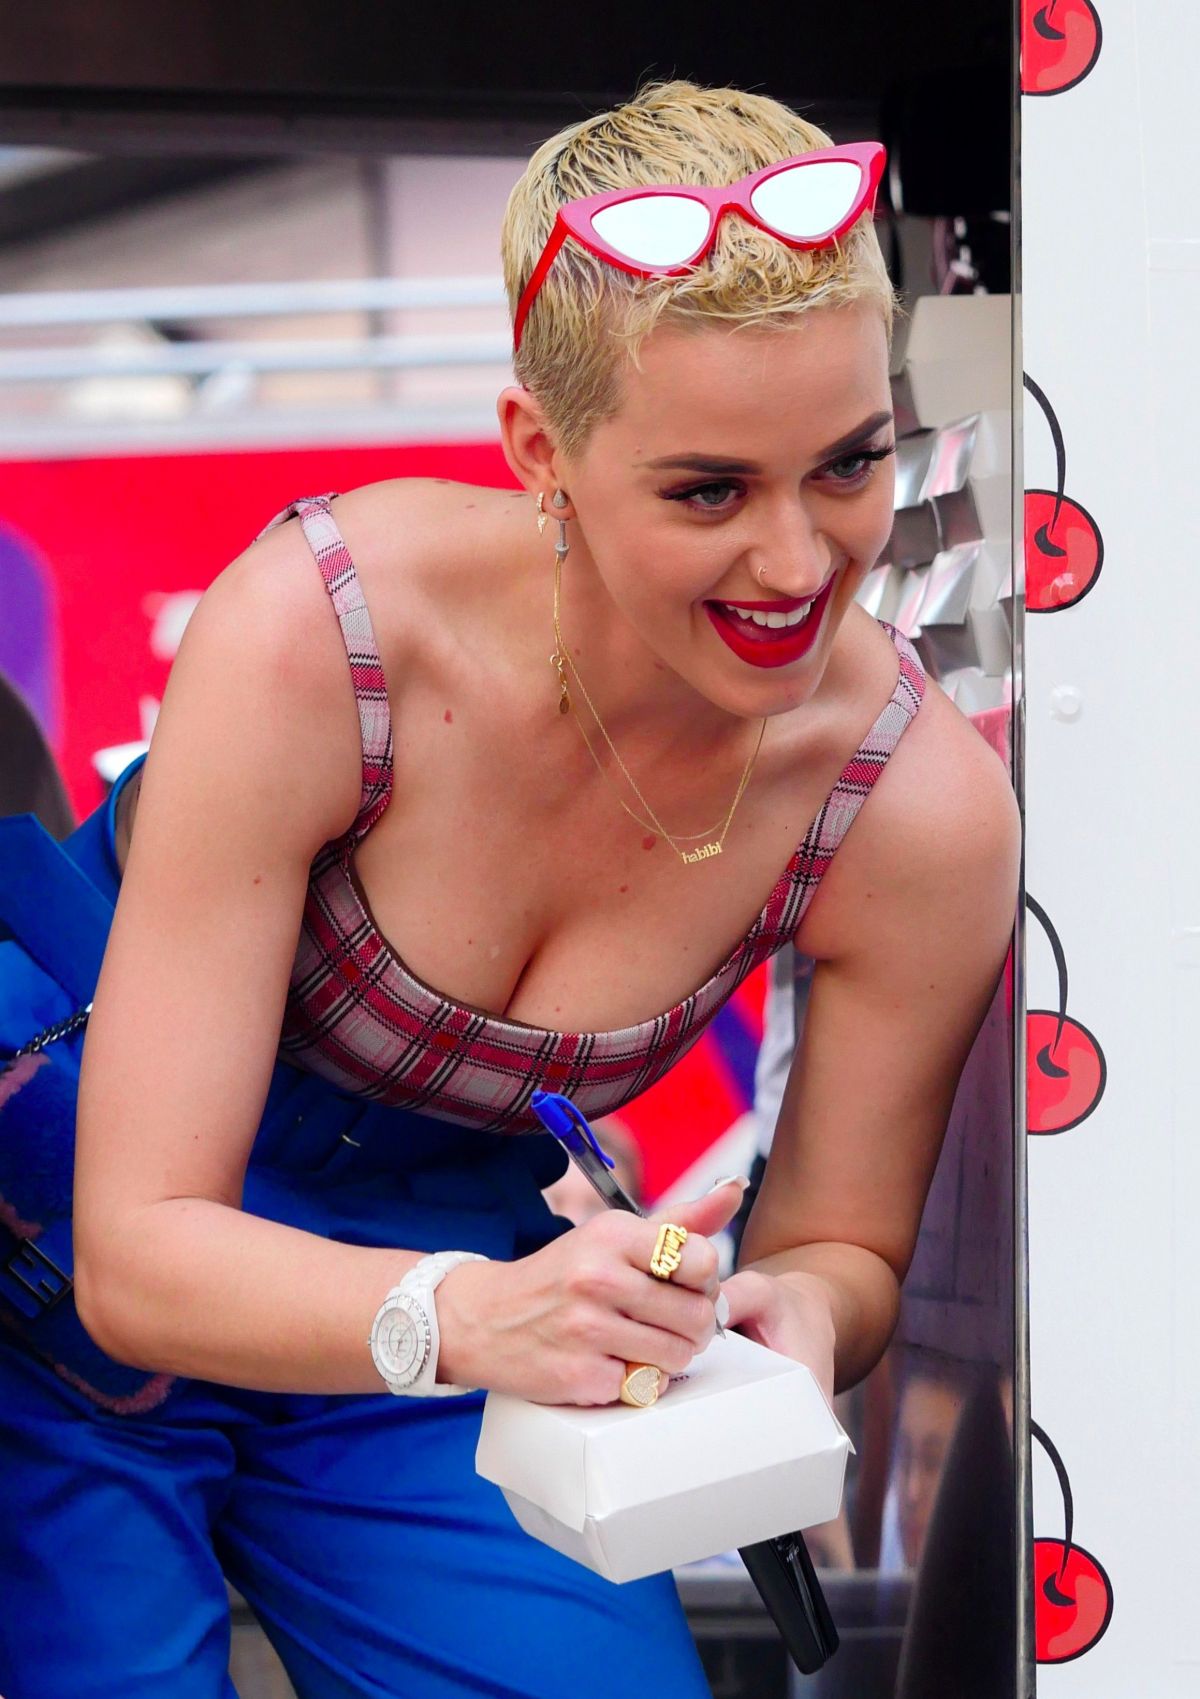 katy-perry-promotes-her-new-song-bon-app